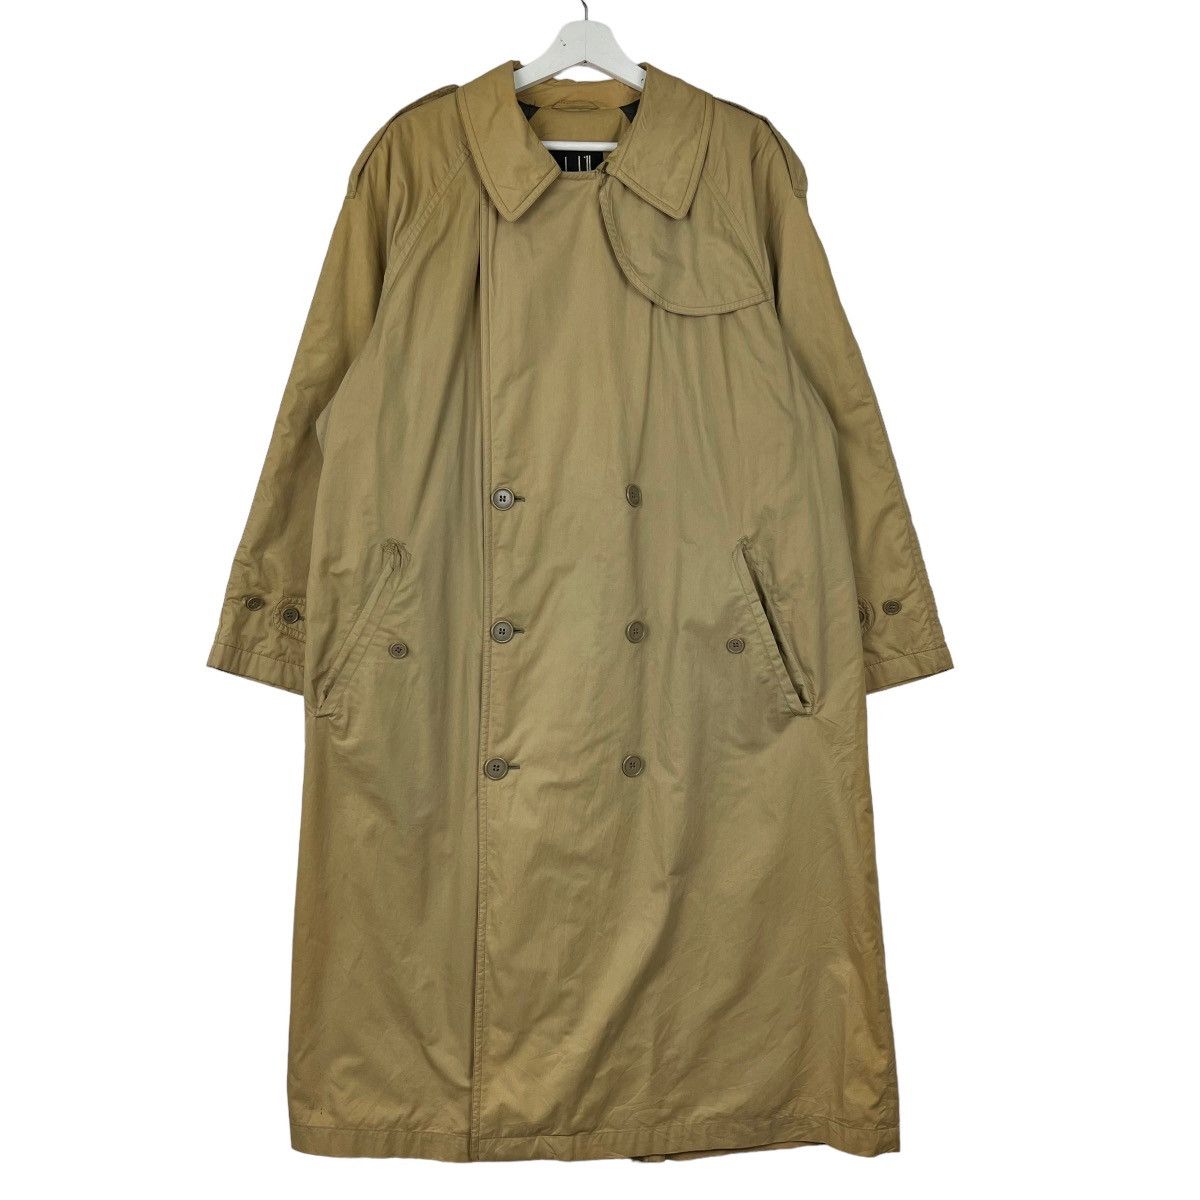 Alfred Dunhill 🔥 DUNHILL TRENCH COAT MADE IN ITALY | Grailed